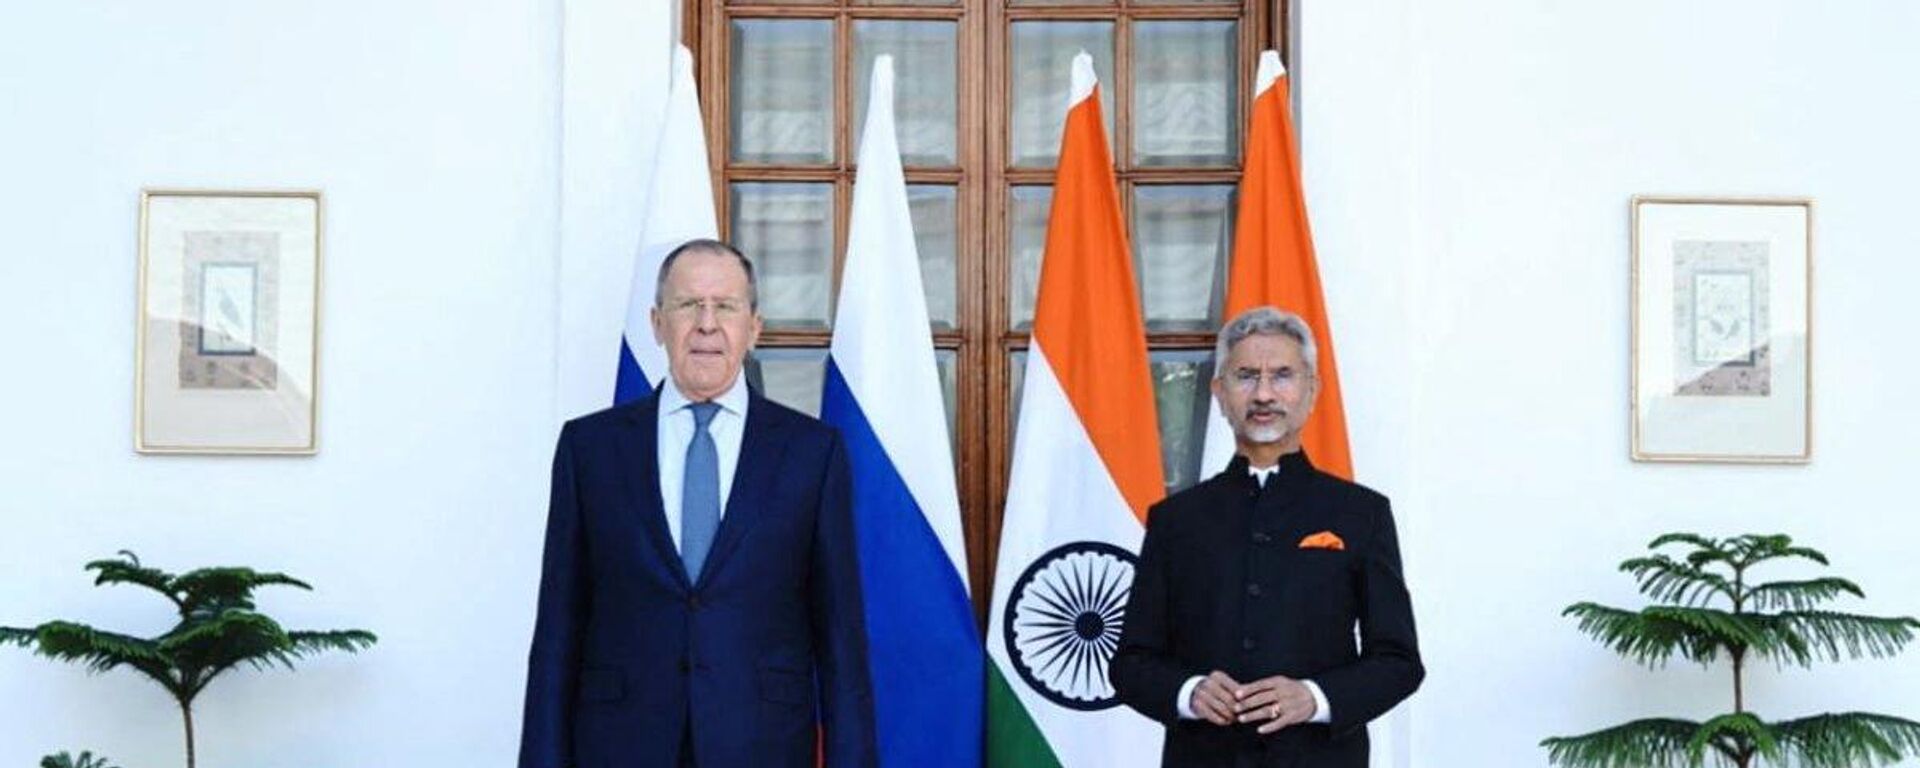 India's Foreign Minister Subrahmanyam Jaishankar and his Russian counterpart Sergei Lavrov are seen before their meeting in New Delhi, India, April 1, 2022 - Sputnik International, 1920, 01.04.2022